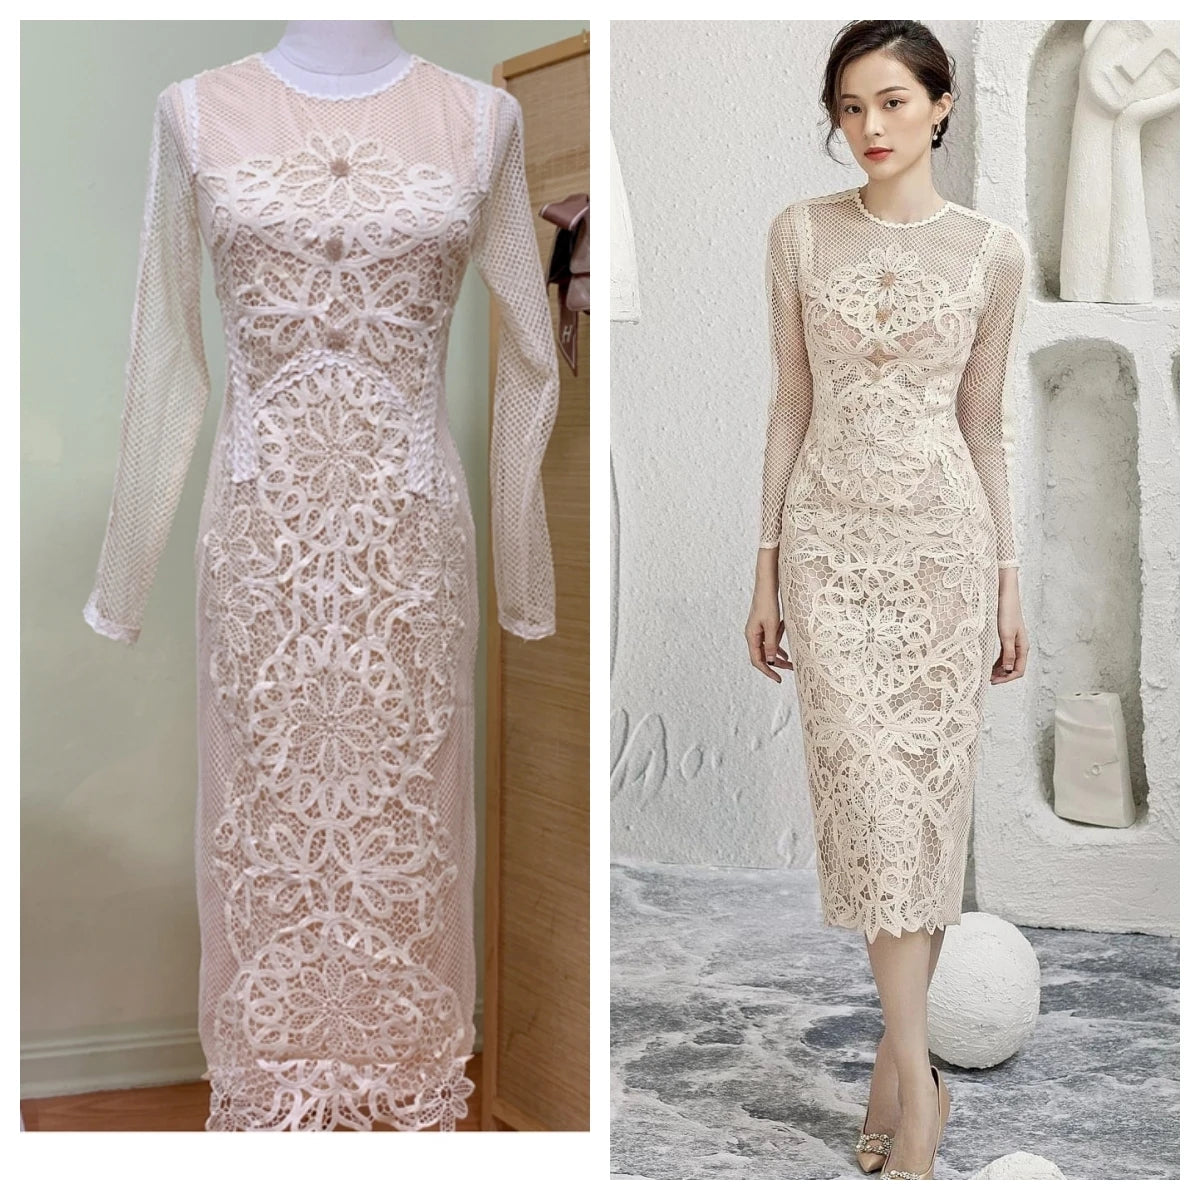 New Fashion Flower Embroidered Lace Prom Dress Long Sleeve Diamond Beads Sheath Bodycon Wedding Party Dress